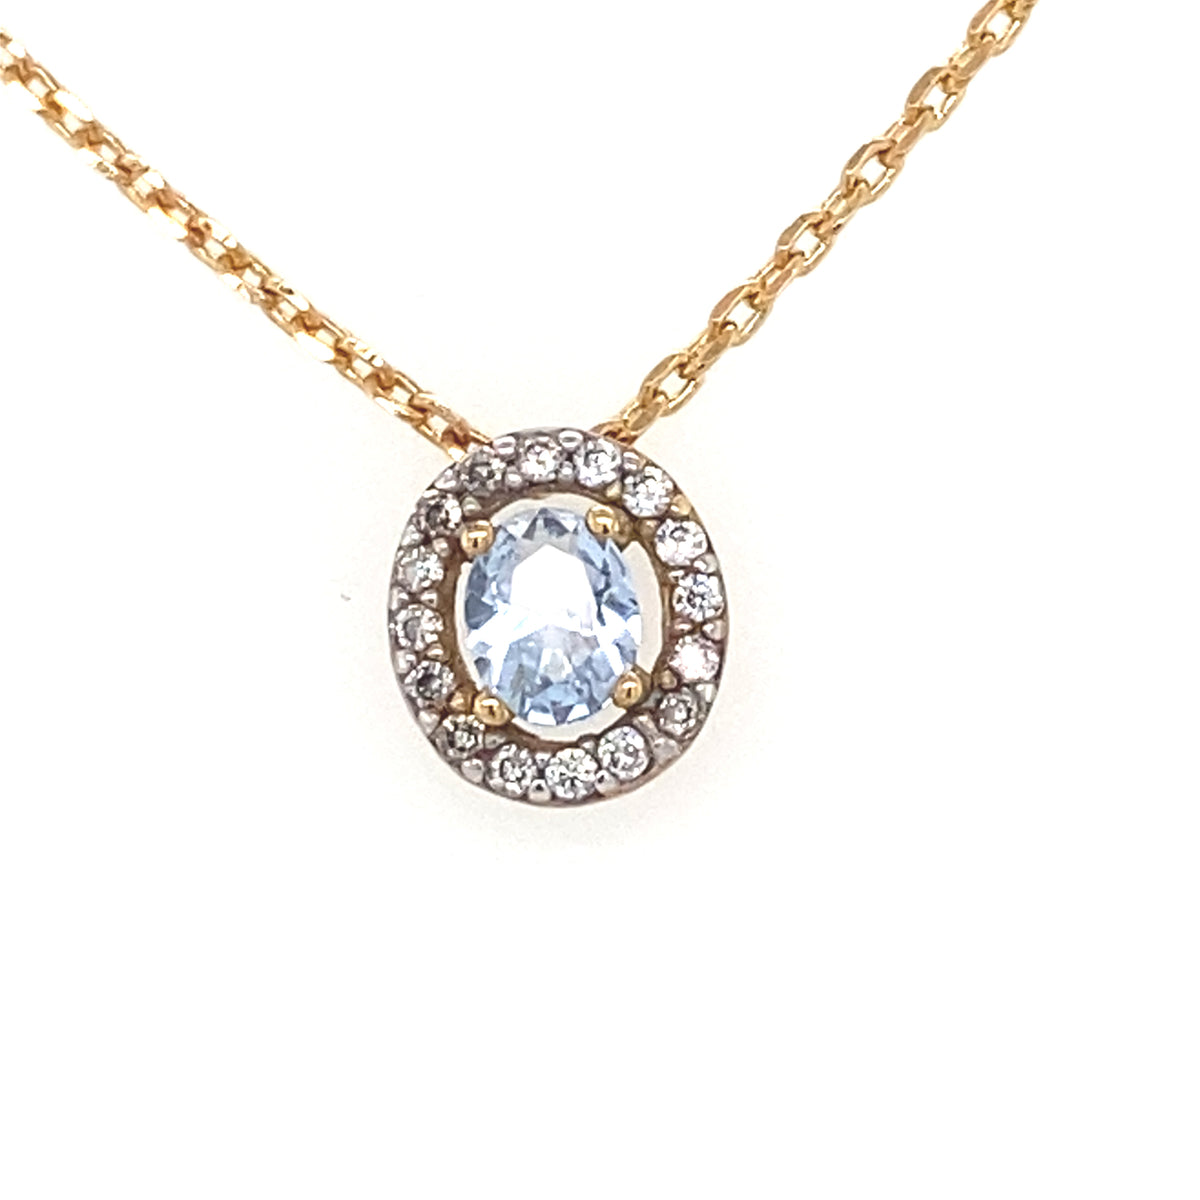 Gold Filled Pendant withLight Blue Stone